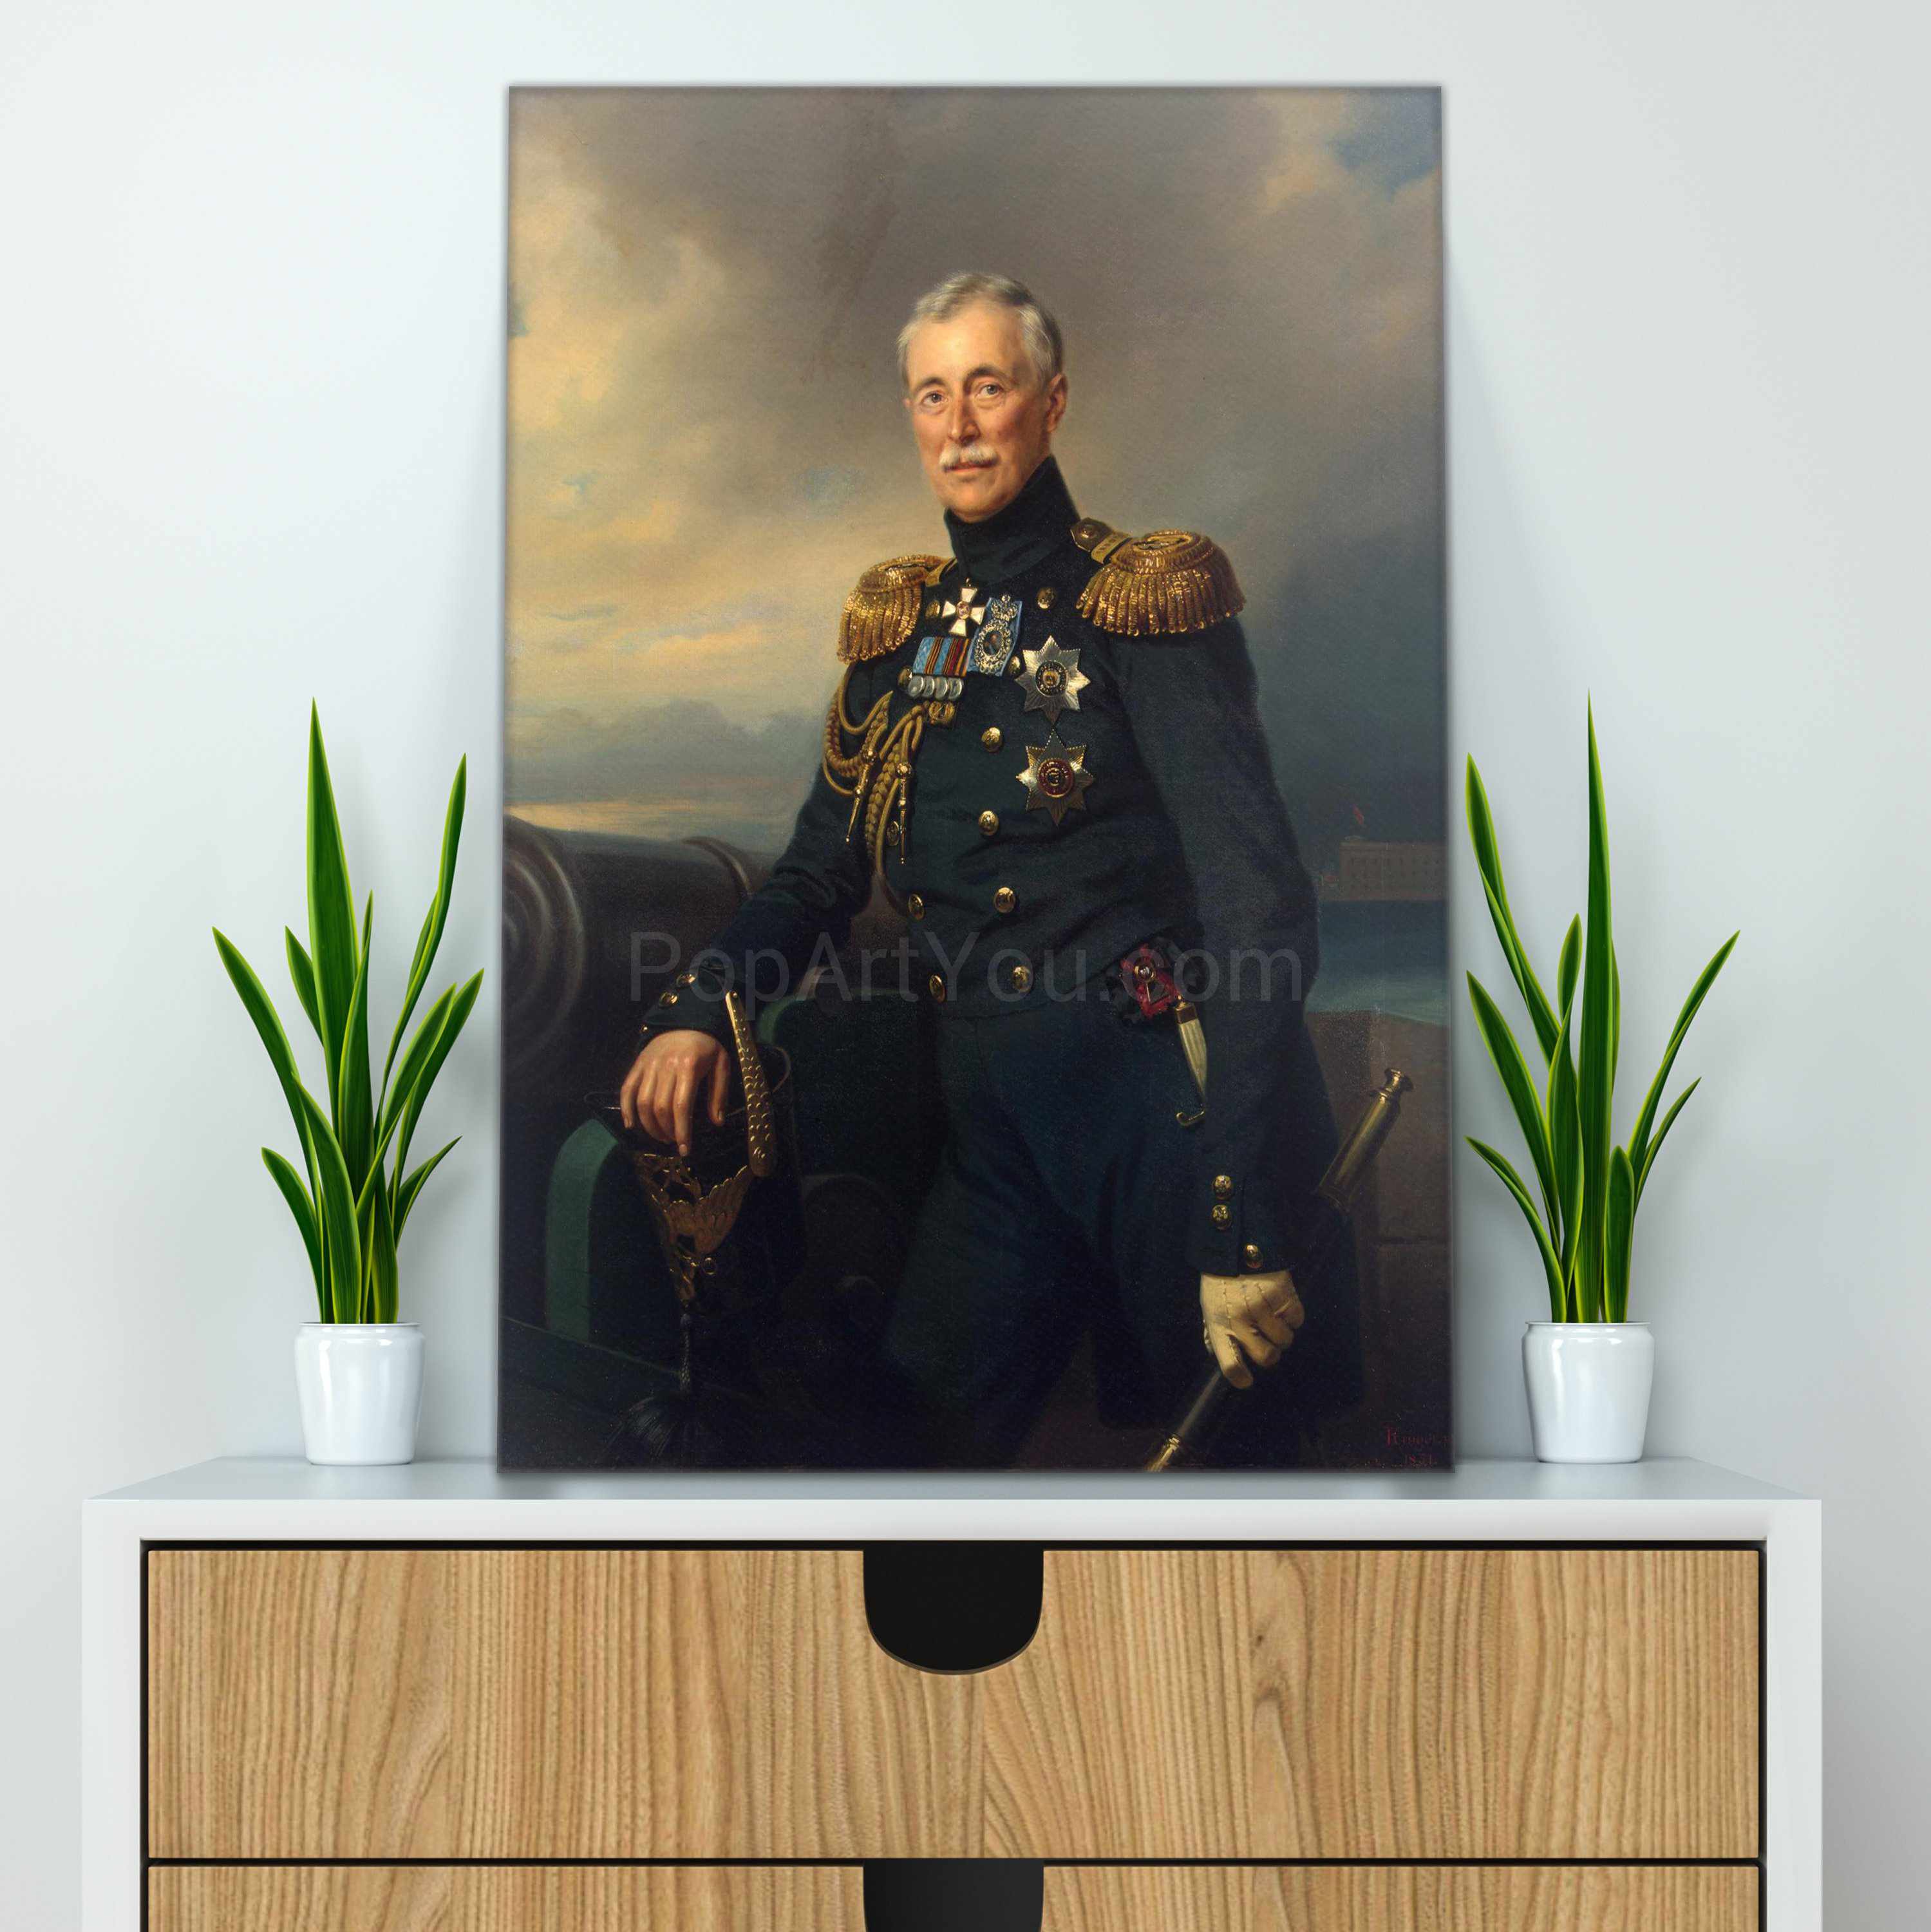 A portrait of a man dressed in a royal costume hangs on the shelf next to two flowers